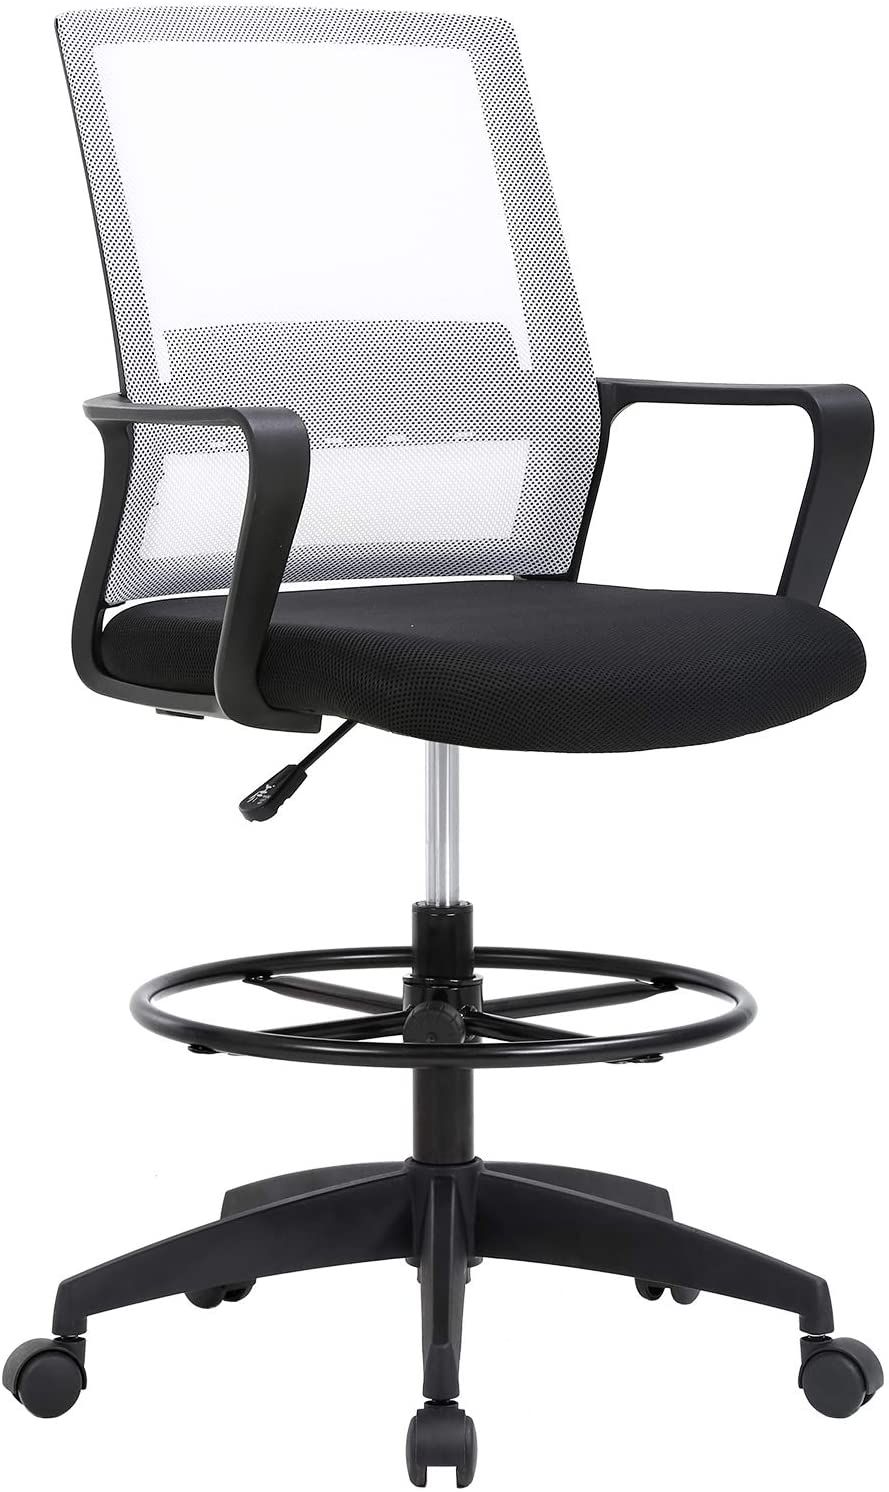 Tall Office Chair Decorating Ideas